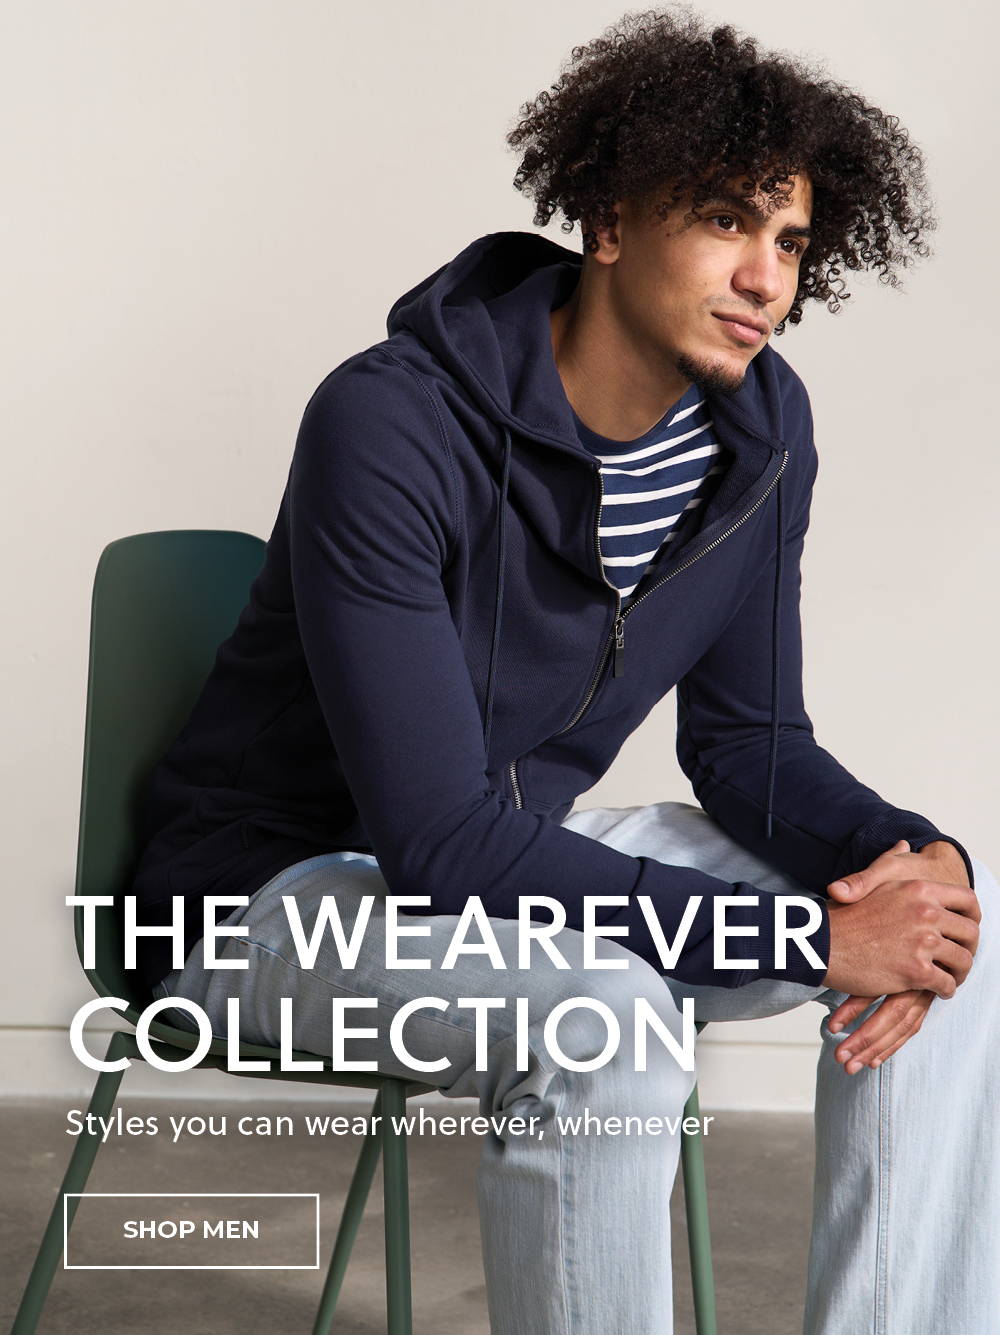 The Wearever Collection. Styles you can wear wherever, whenever by joyouslyvibrantlife.